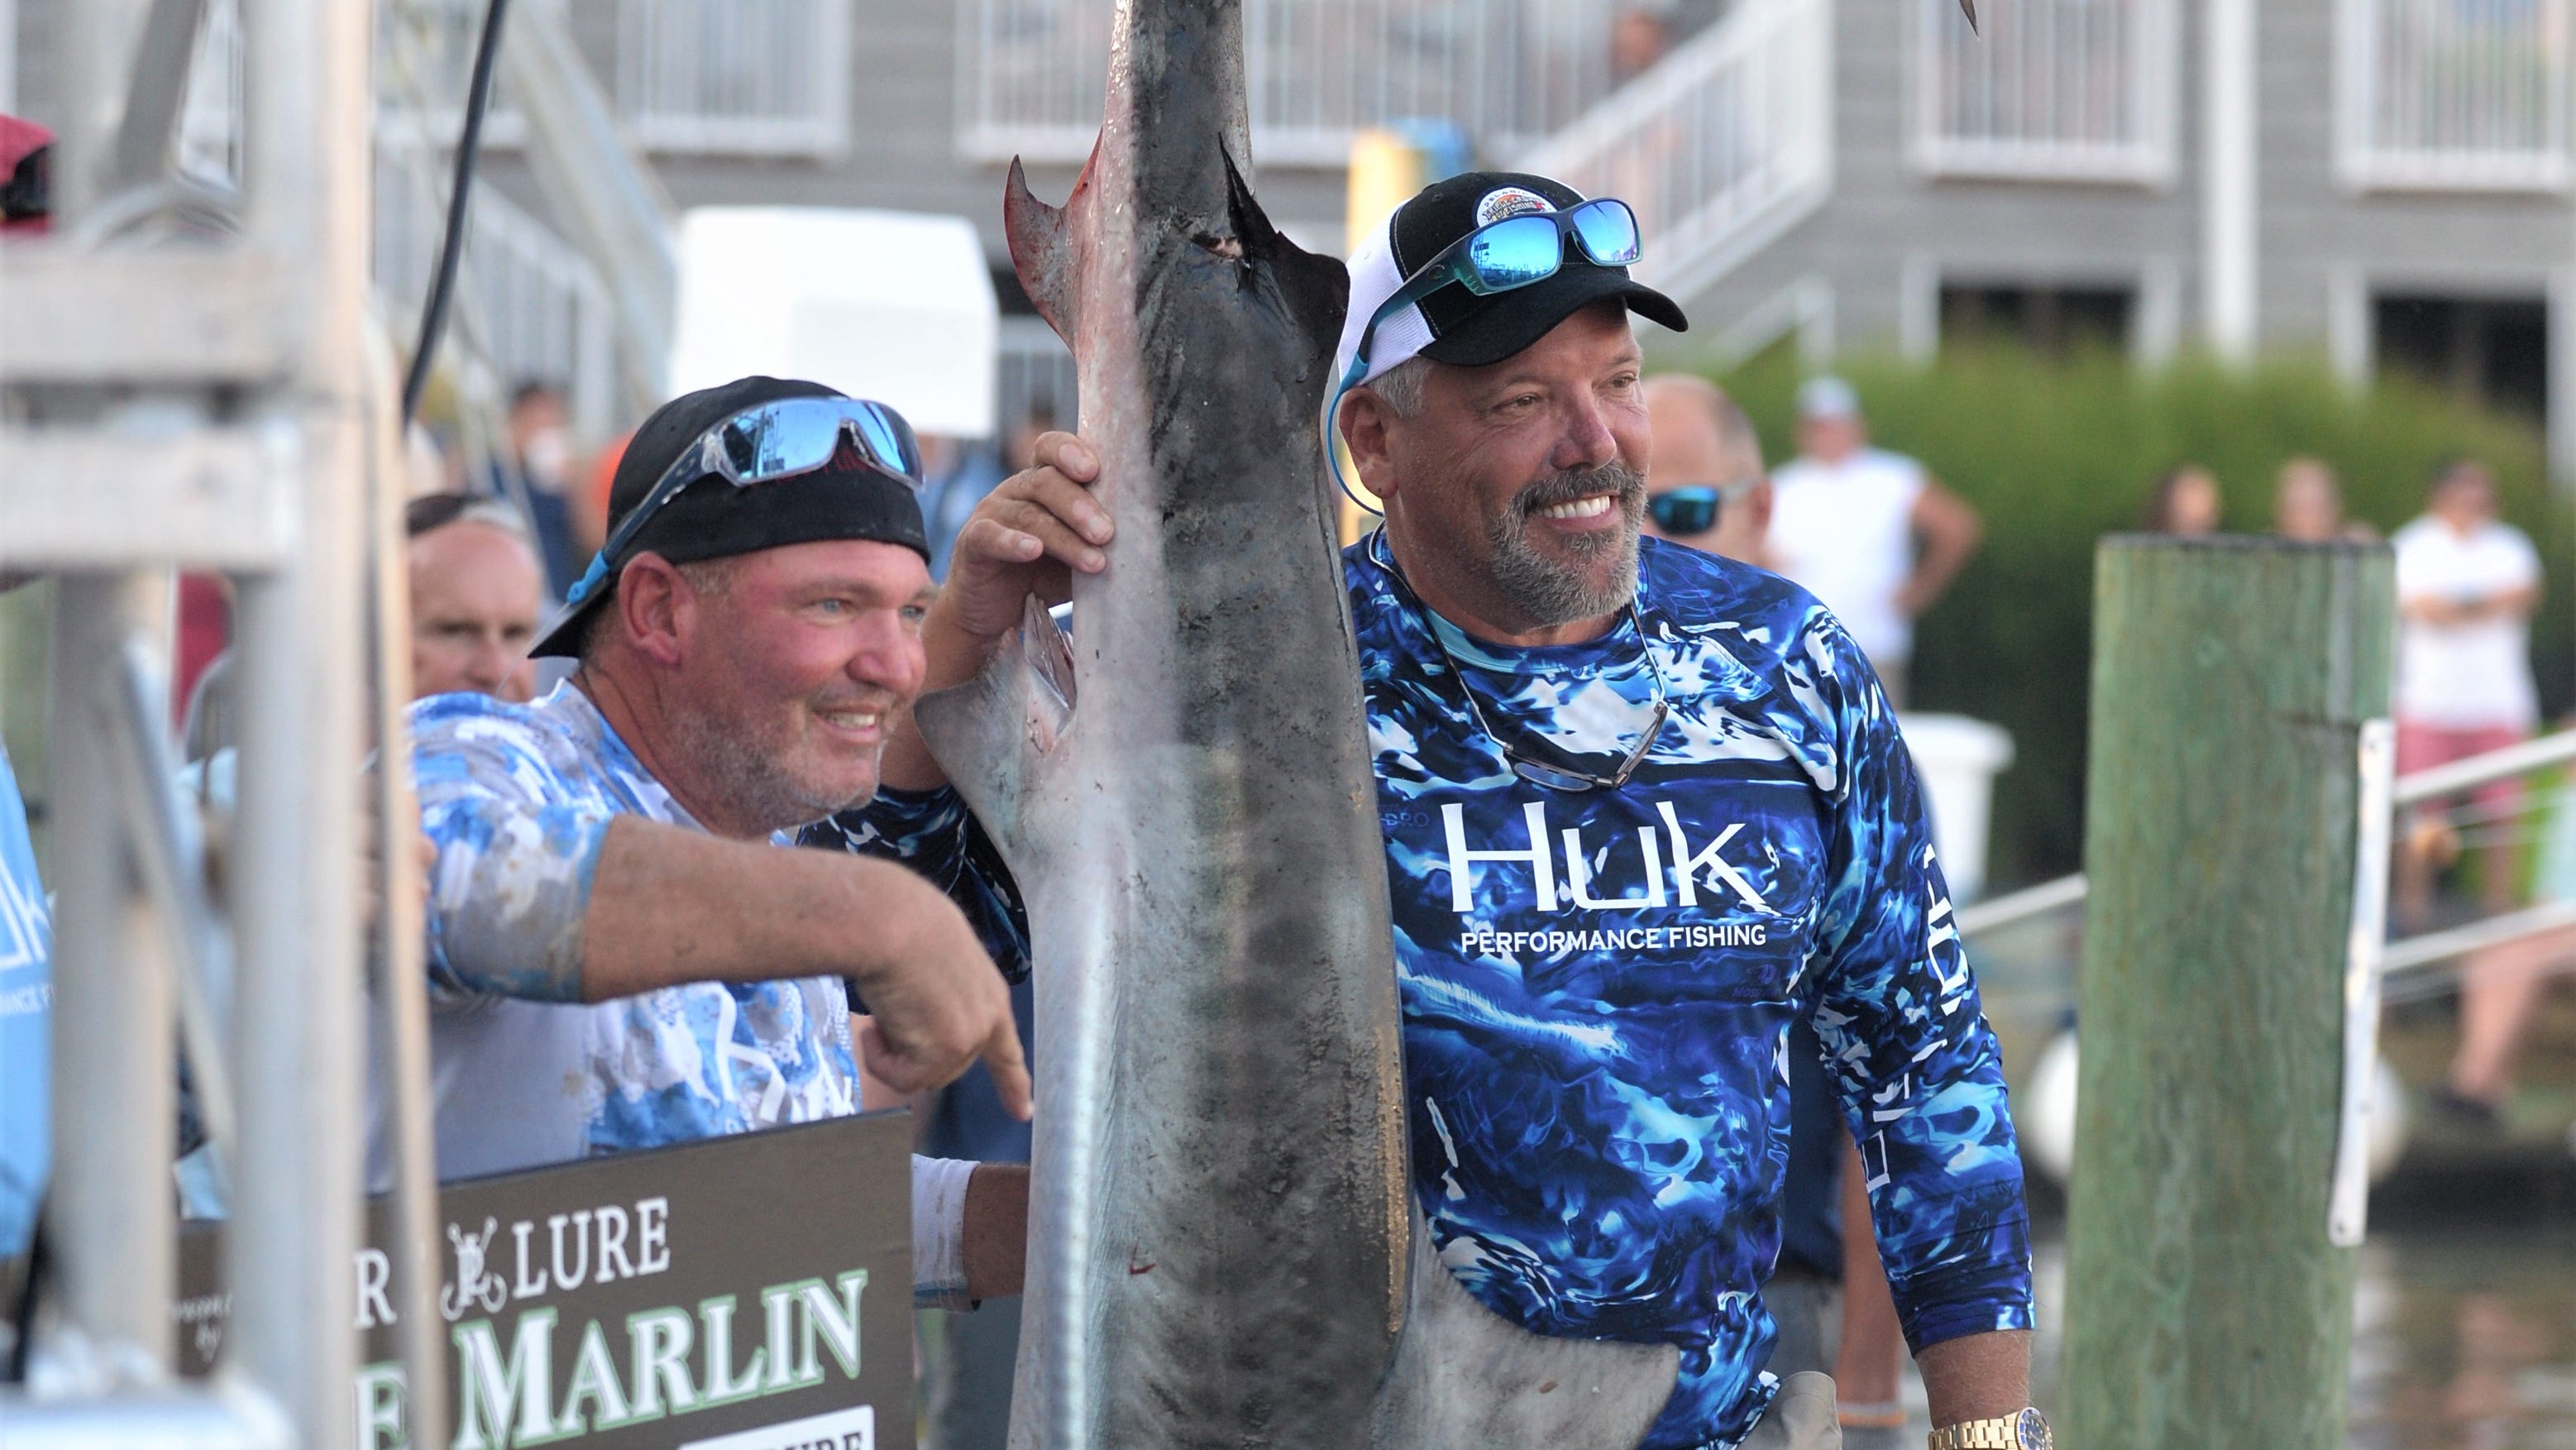 White Marlin Open 2021 leaderboard after day 1